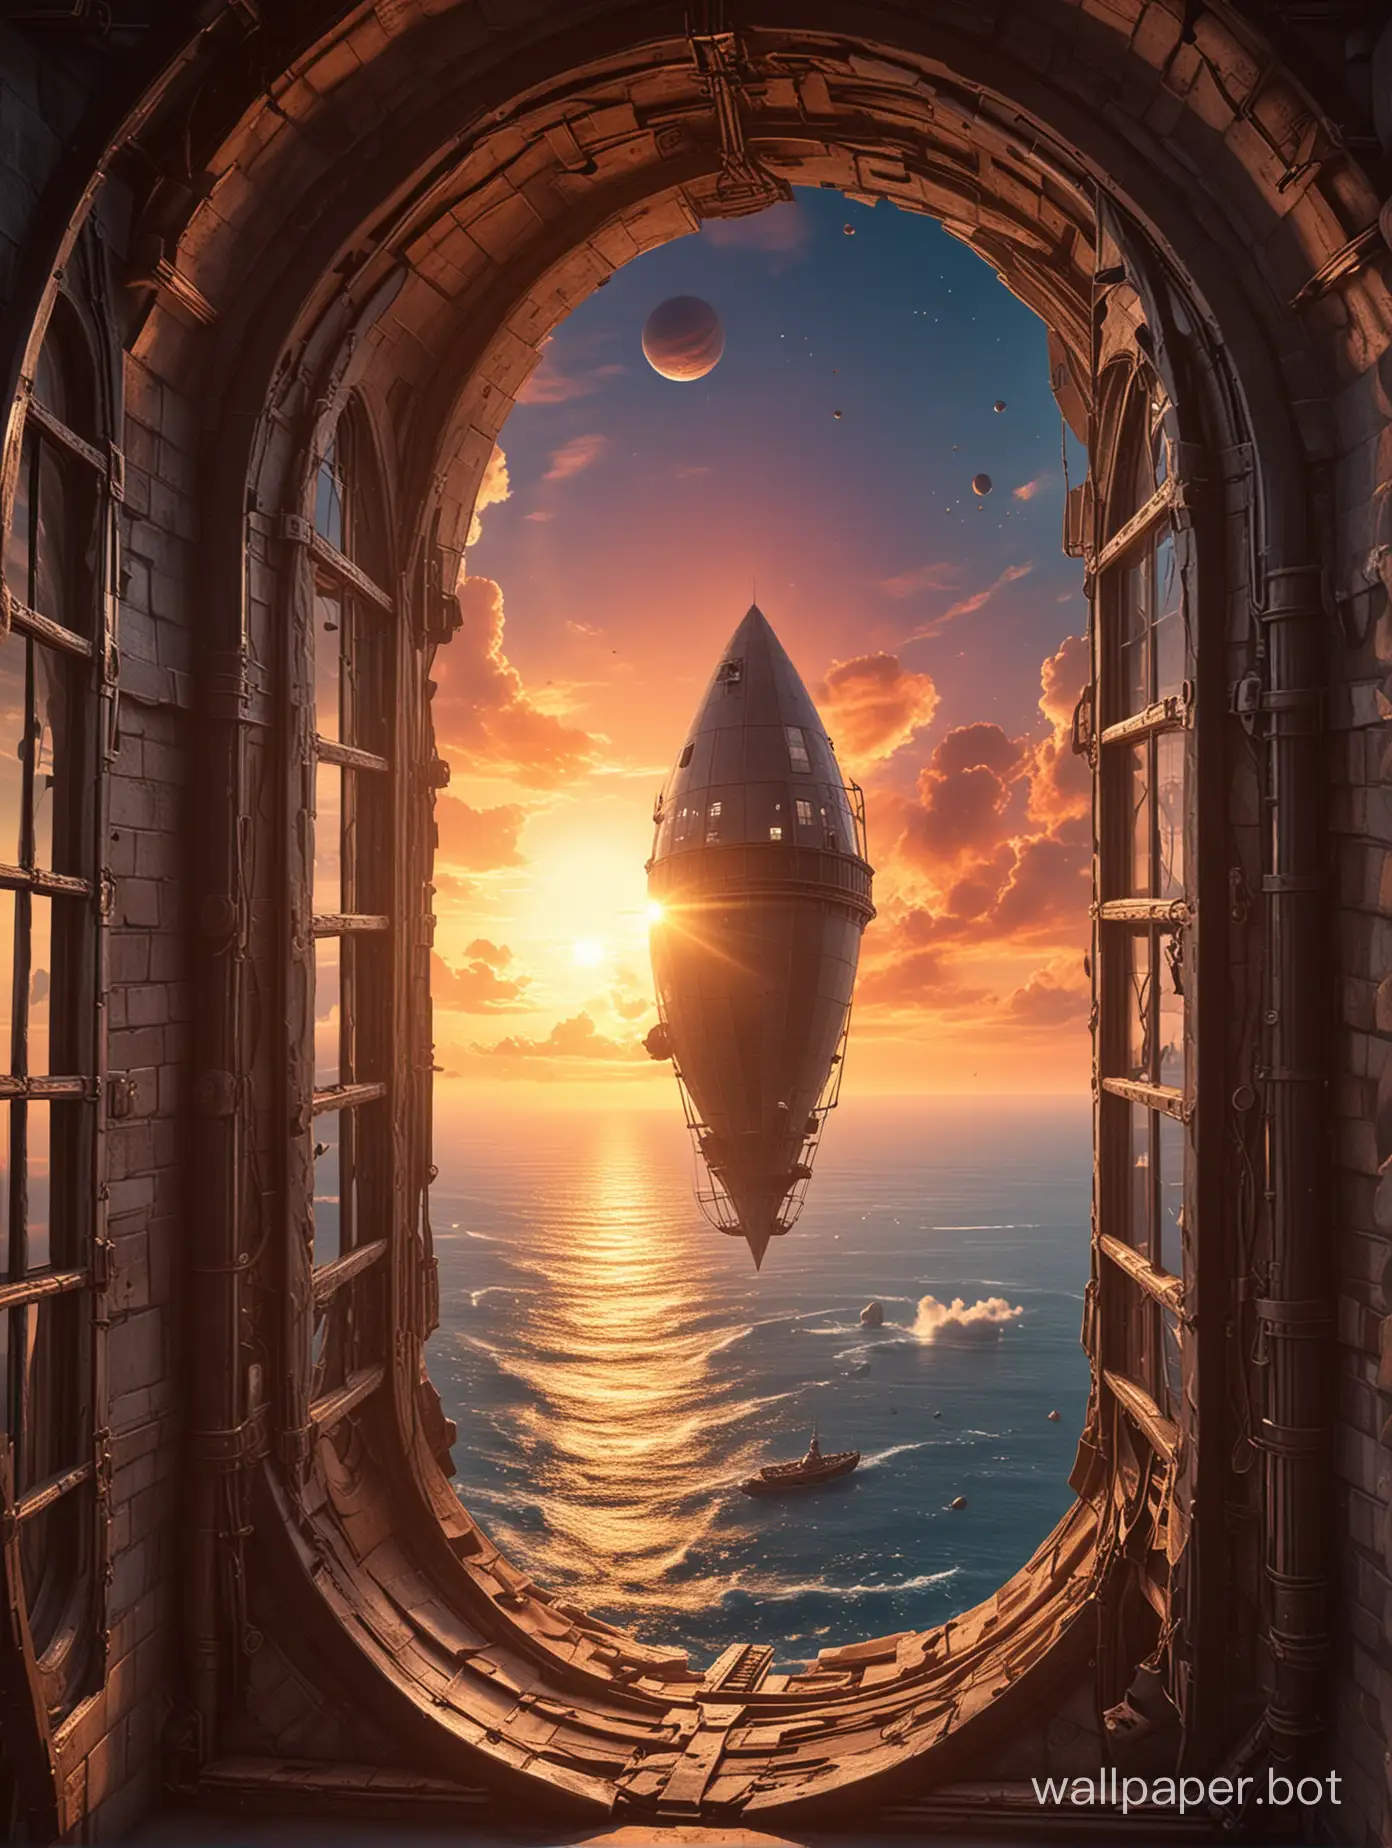 A narrow window into a fantastic space with a planet. fantastic tower against sunset background. There is an airship with sails in the sky. High resolution. Very definition.  sci-fi. Anime. Steampunk.